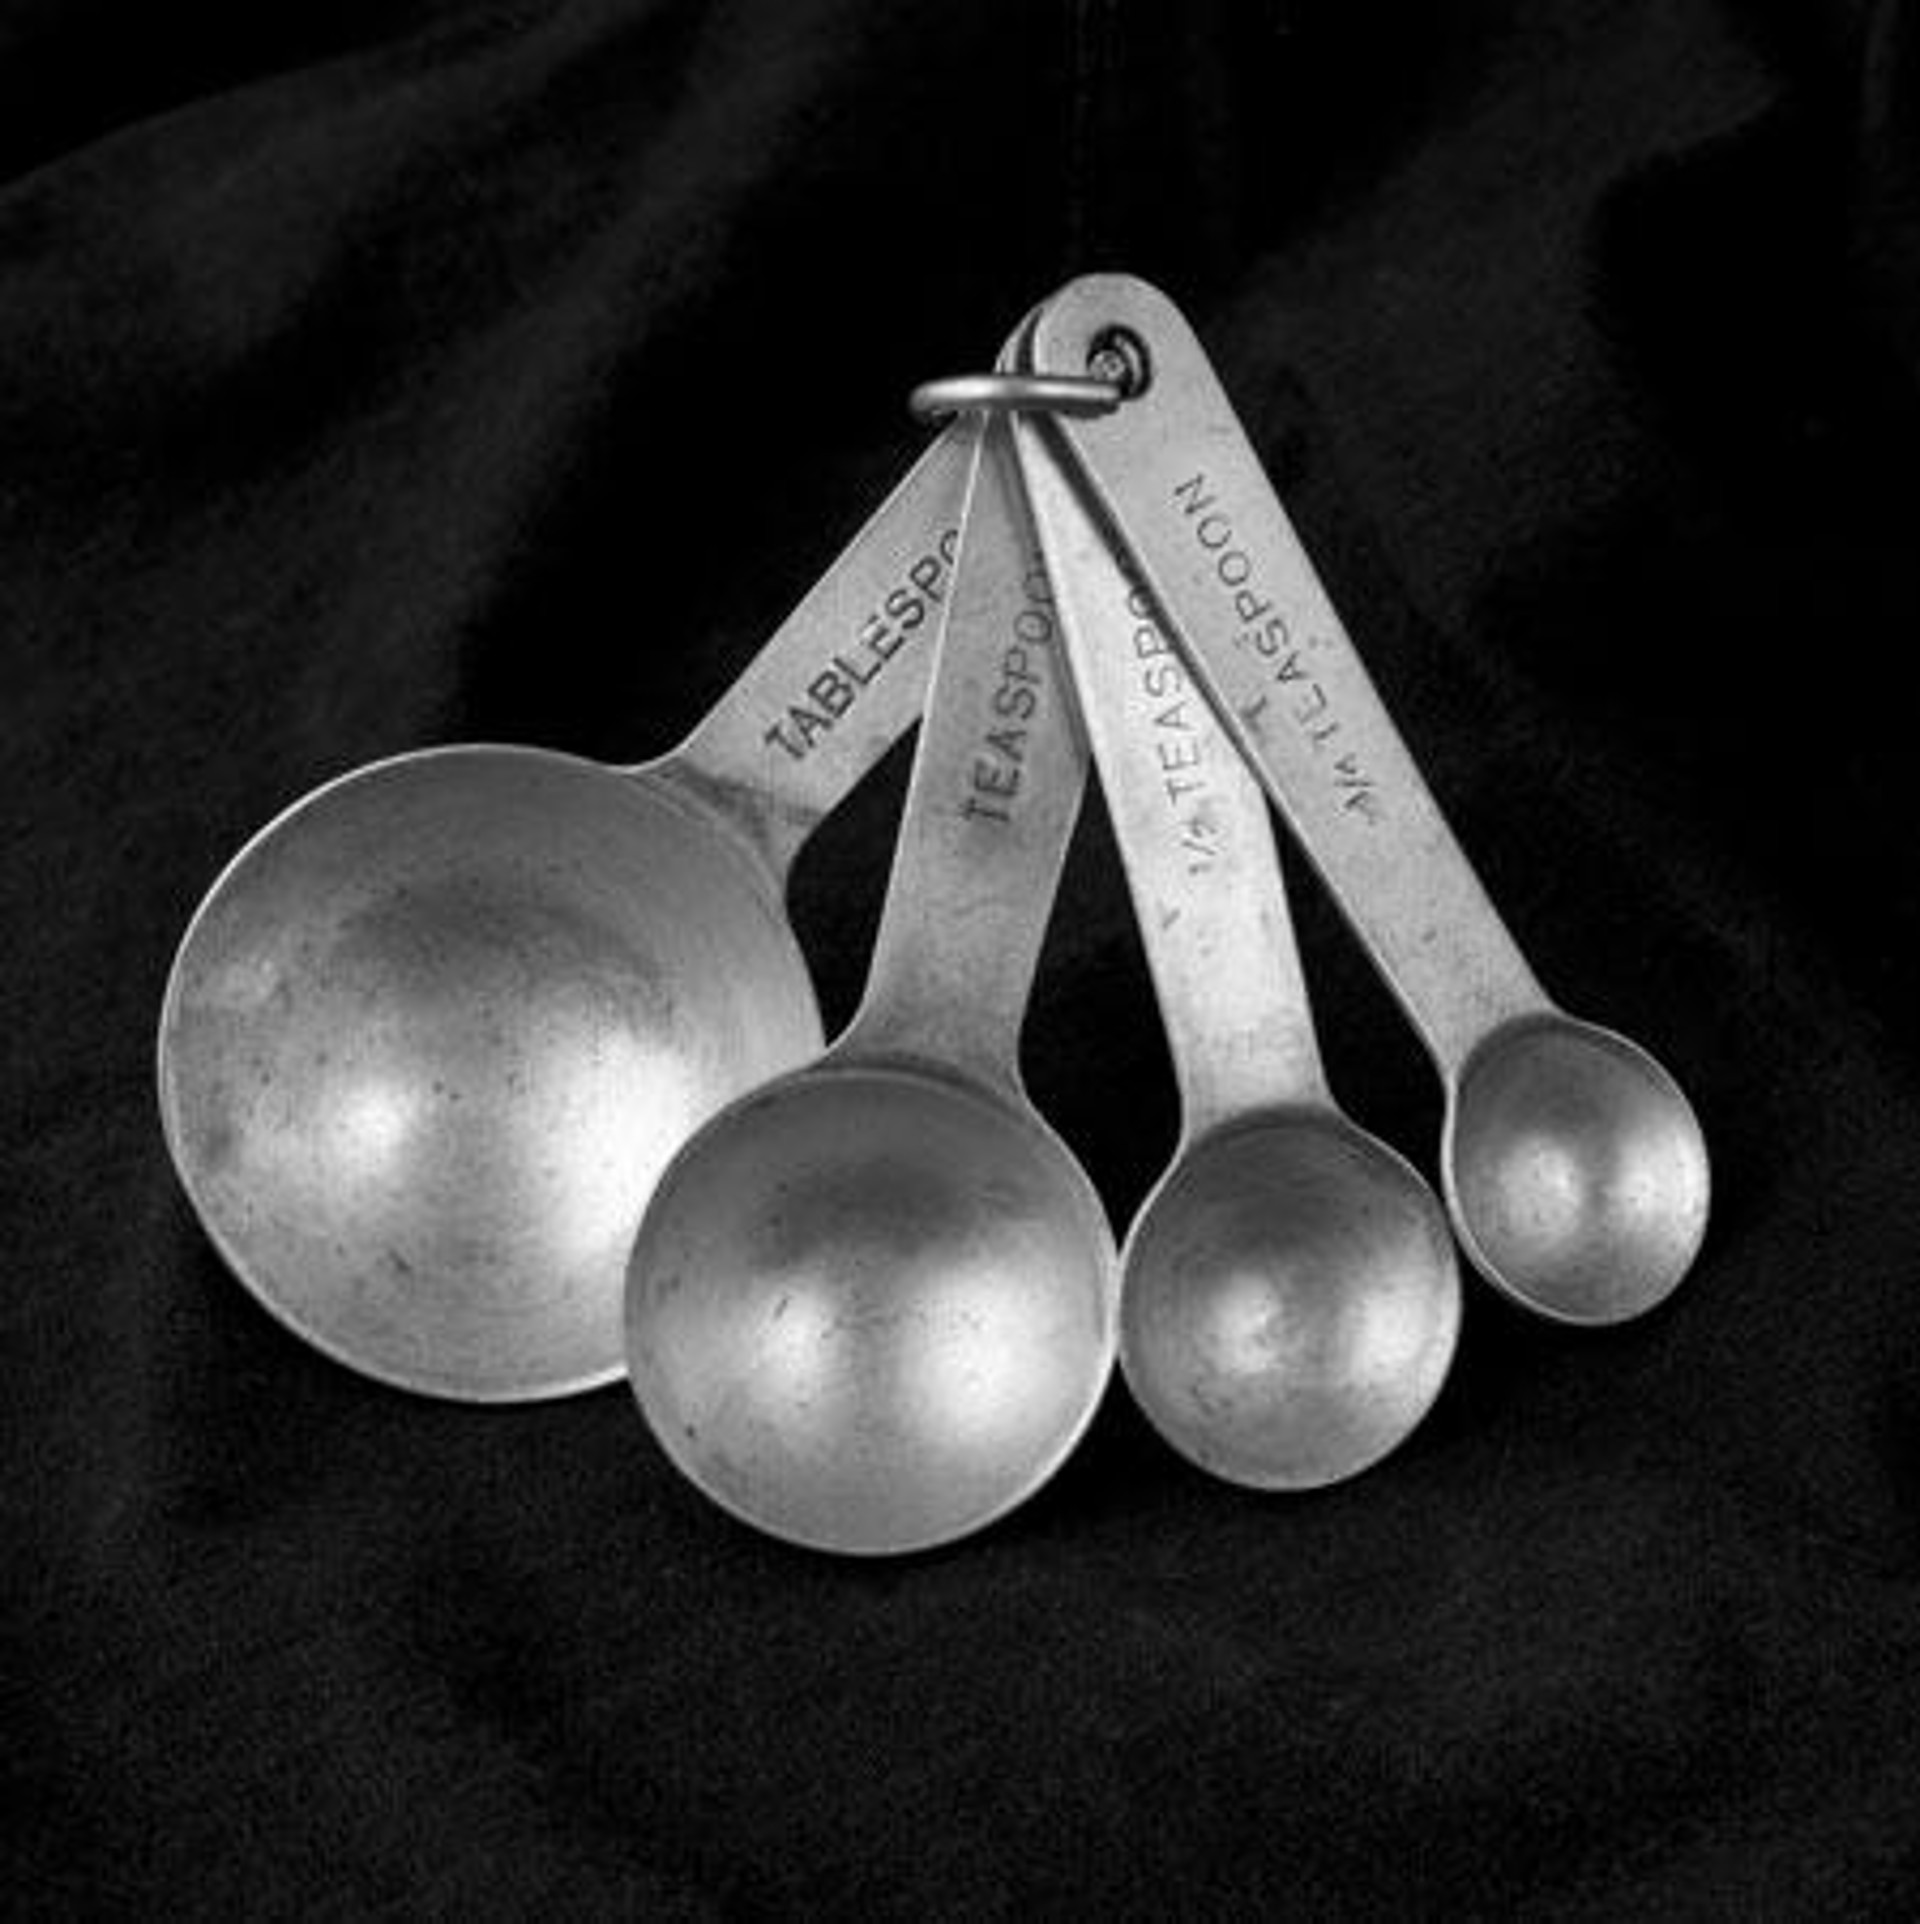 Measuring Spoons by Richard Snodgrass